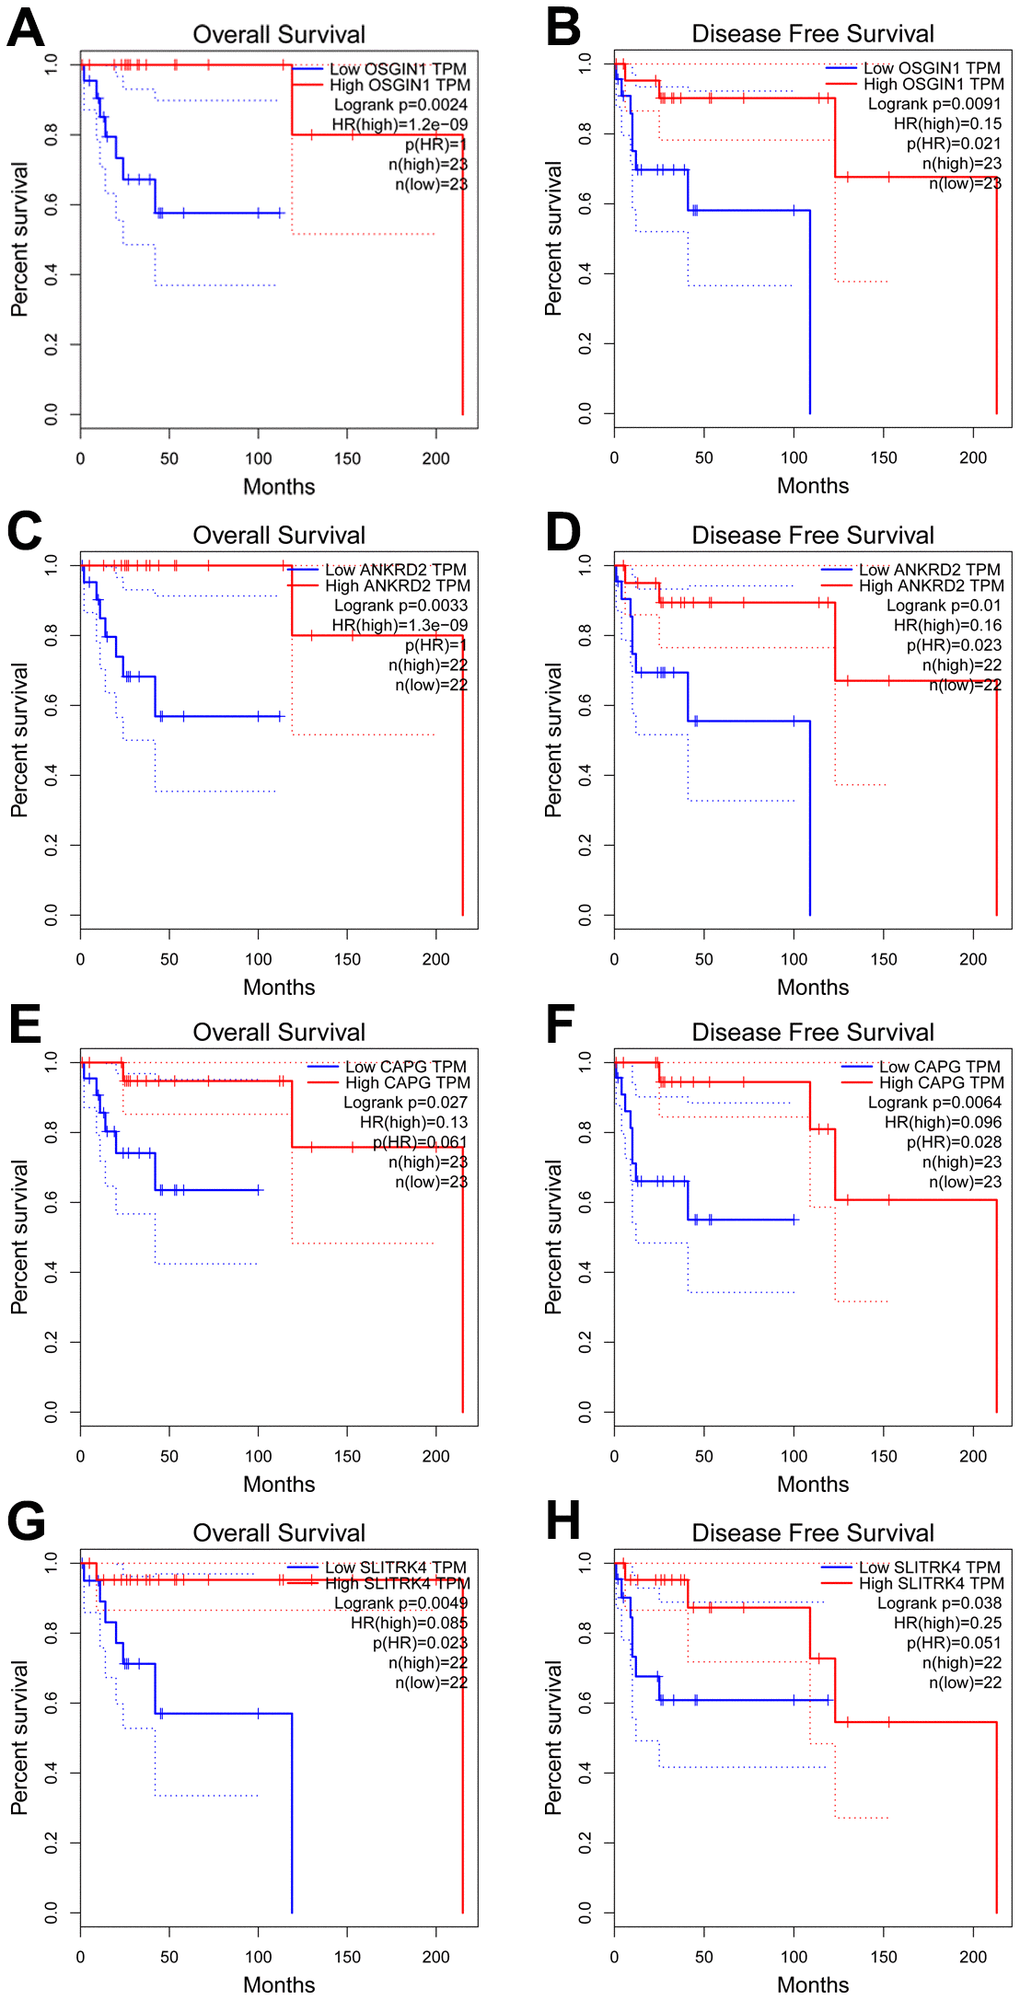 Prognostic analysis of genes correlated with CDH23 in DLBCL (GEPIA). (A, B) The relationship between OSGIN1 expression and overall survival and disease free survival of DLBCL patients. (C, D) The relationship between ANKRD2 expression and overall survival and disease free survival of DLBCL patients. (E, F) The relationship between CAPG expression and overall survival and disease free survival of DLBCL patients. (G, H) The relationship between SLITRK4 expression and overall survival and disease free survival of DLBCL patients.